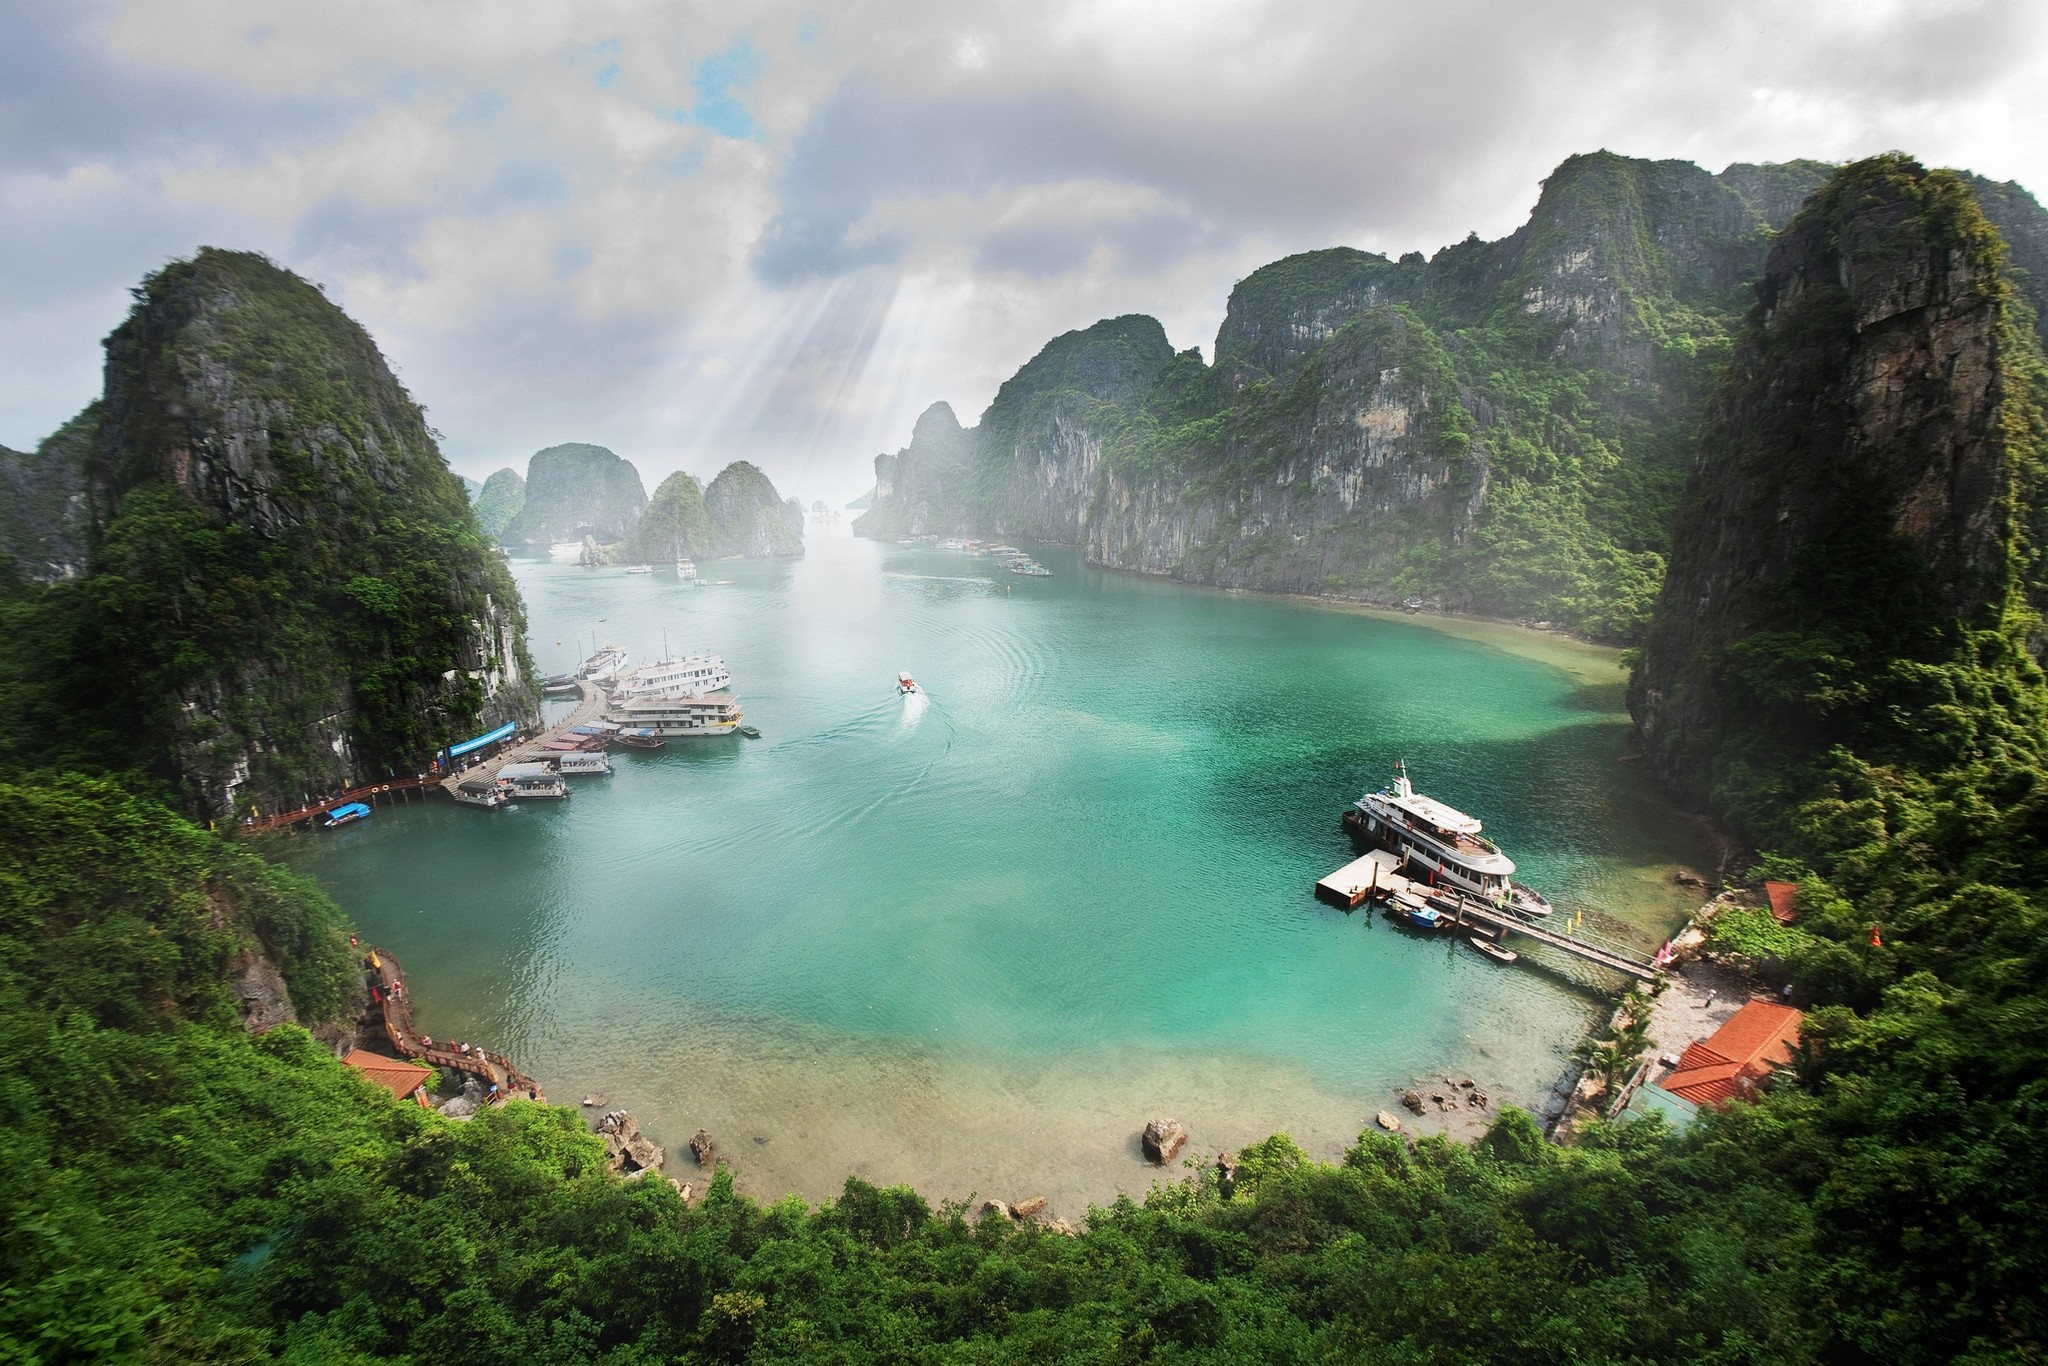 General 2048x1366 nature photography landscape beach tropical forest clouds sea ship boat sun rays rocks island Ha Long Bay Vietnam Asia